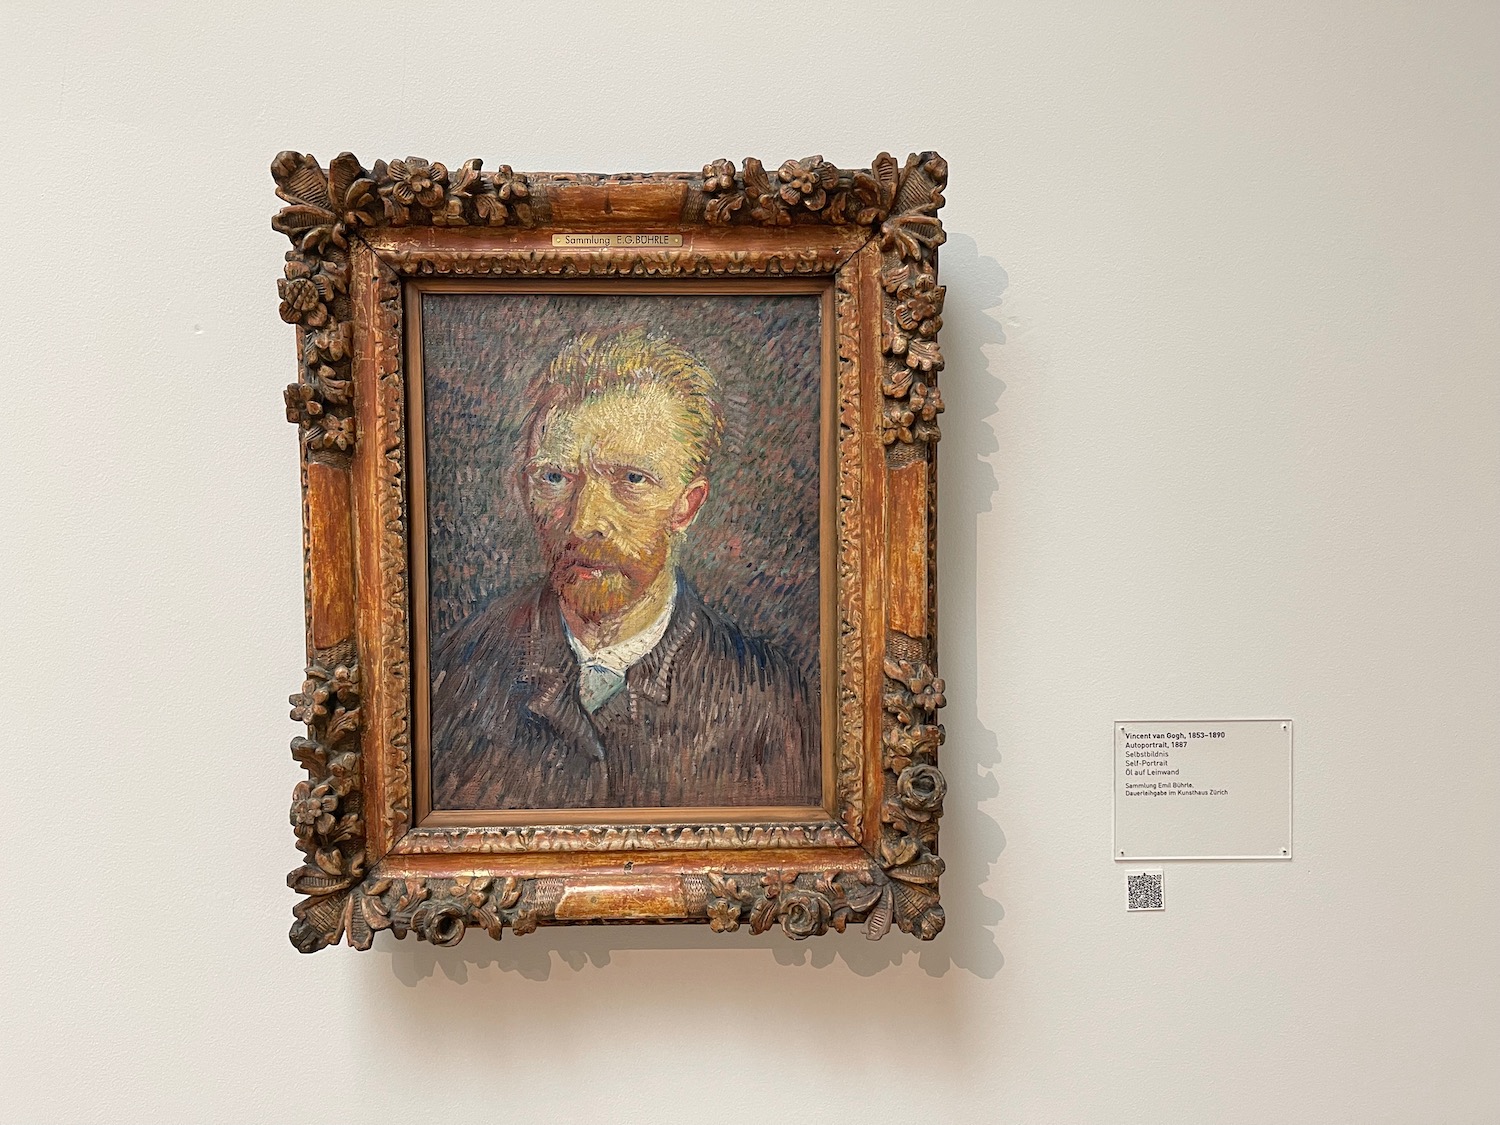 a painting of a man in a frame